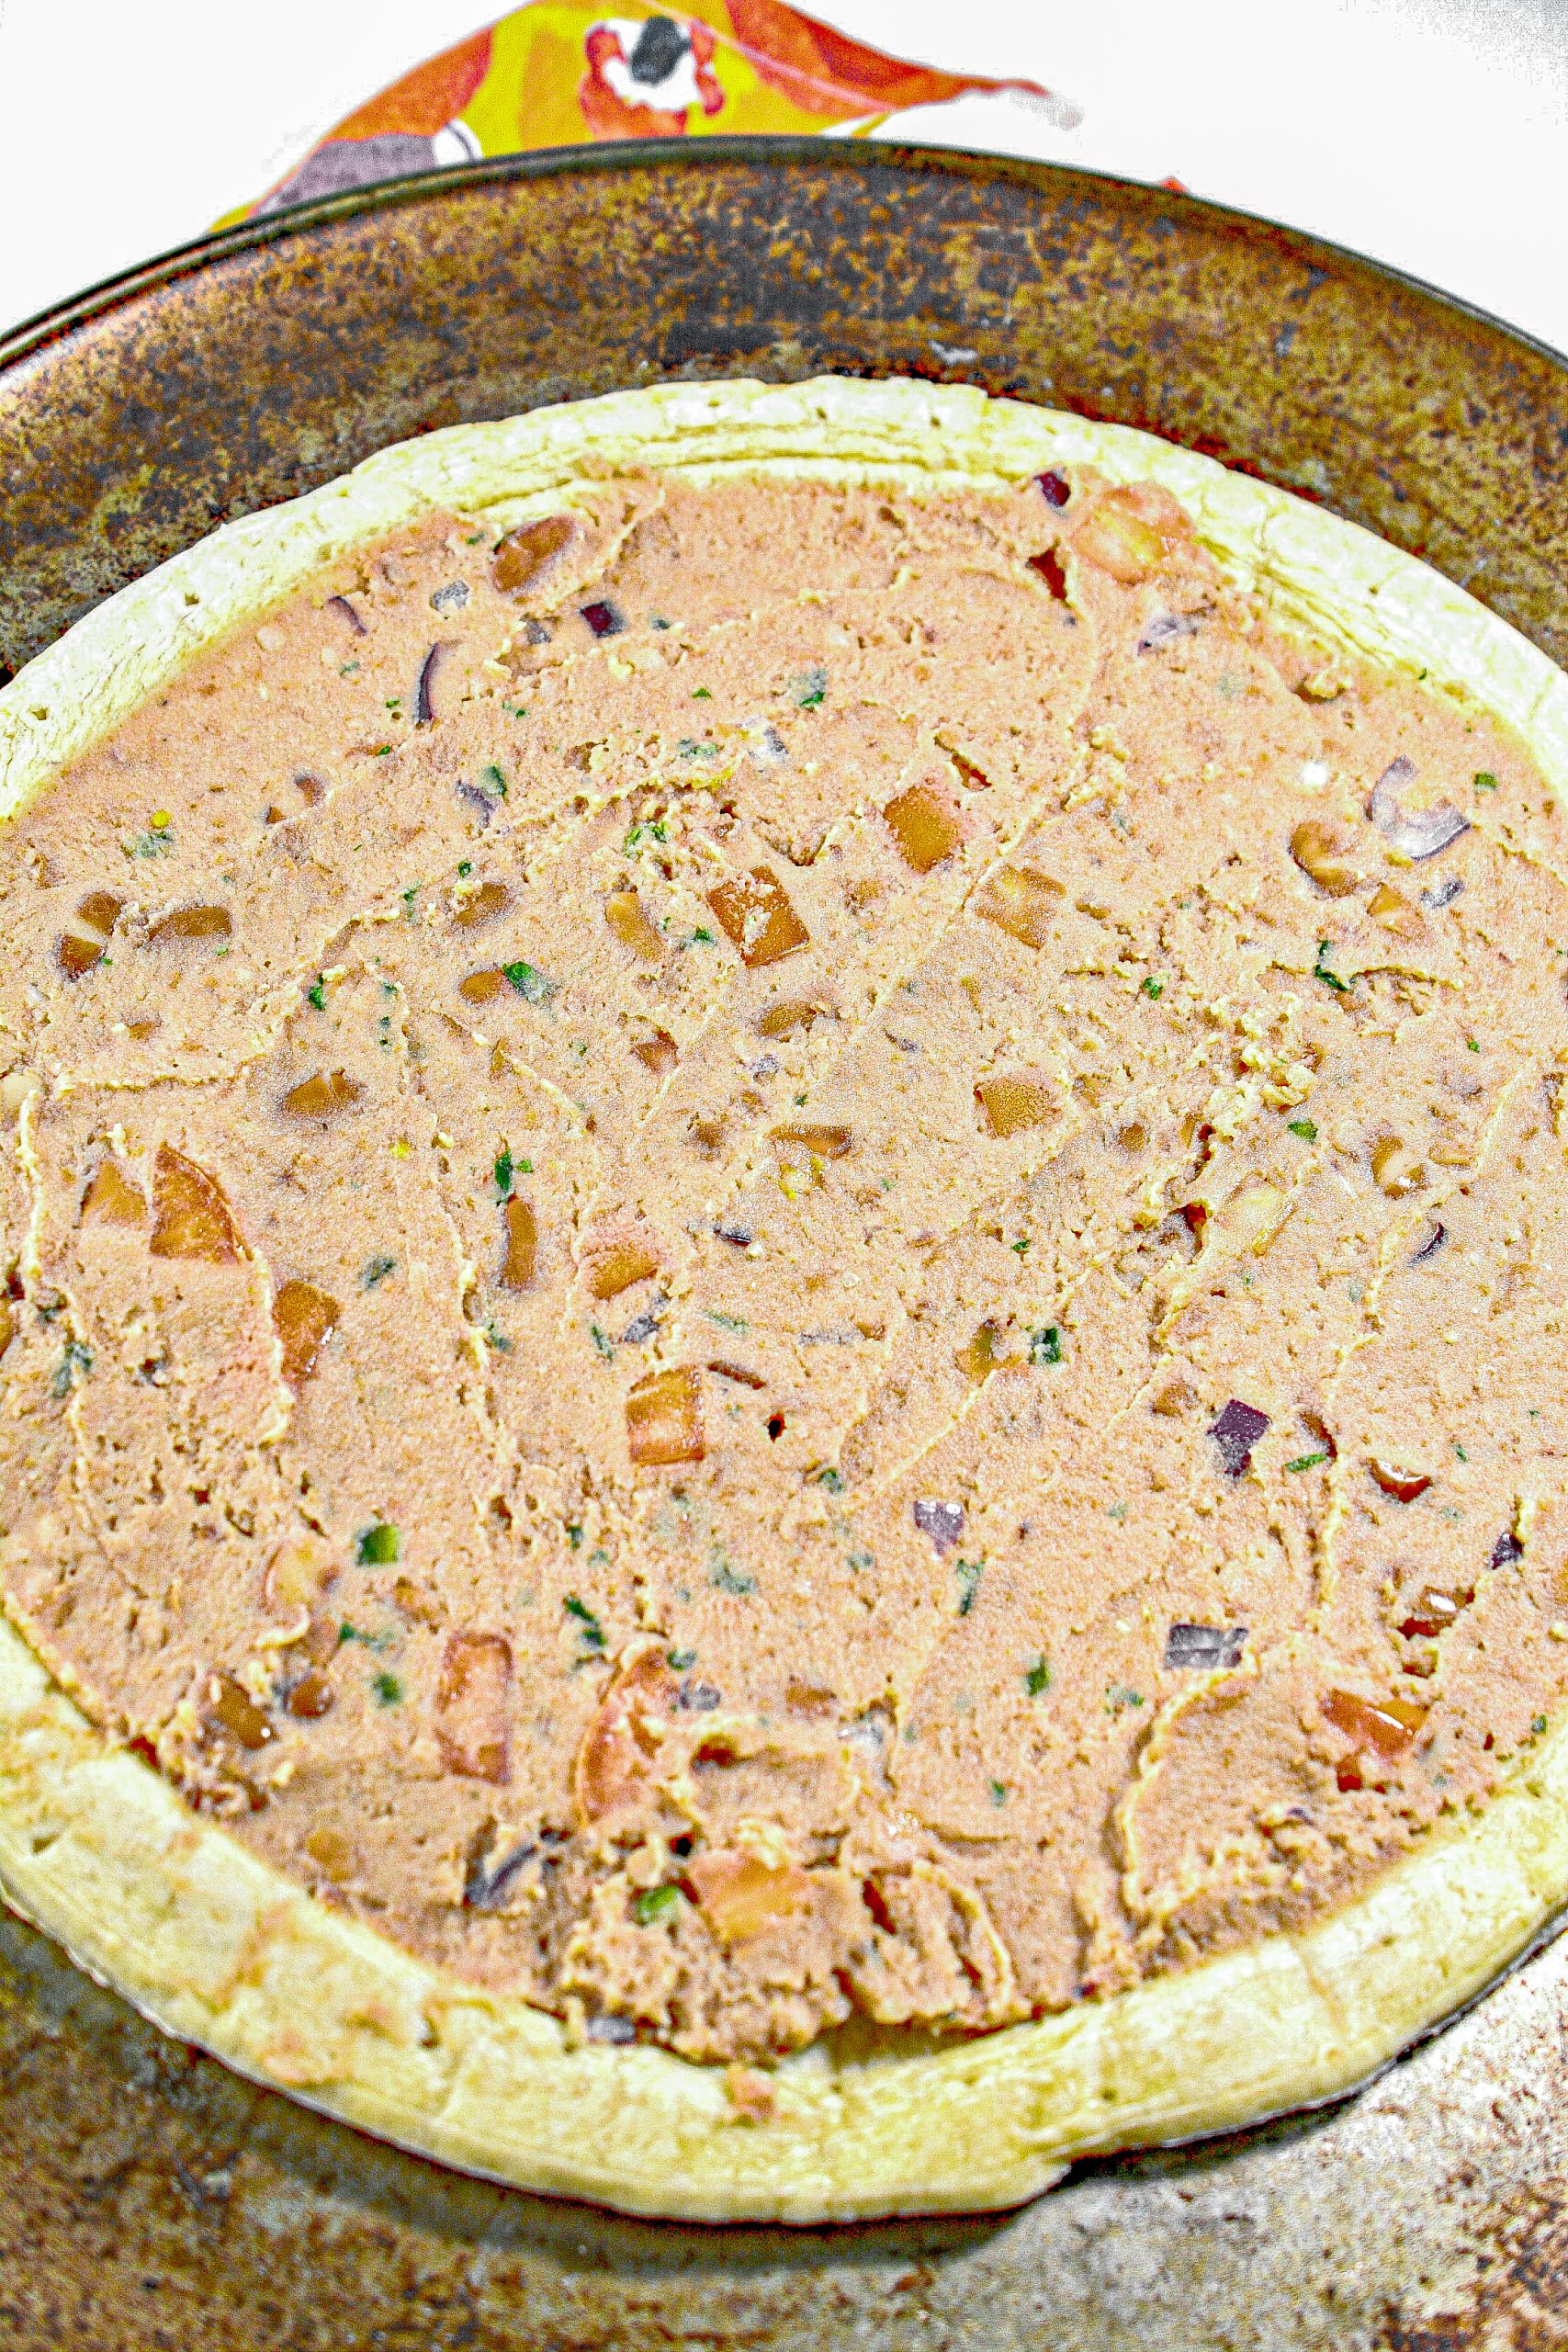 Spread the bean mixture out in an even layer over the prepared pizza crust.